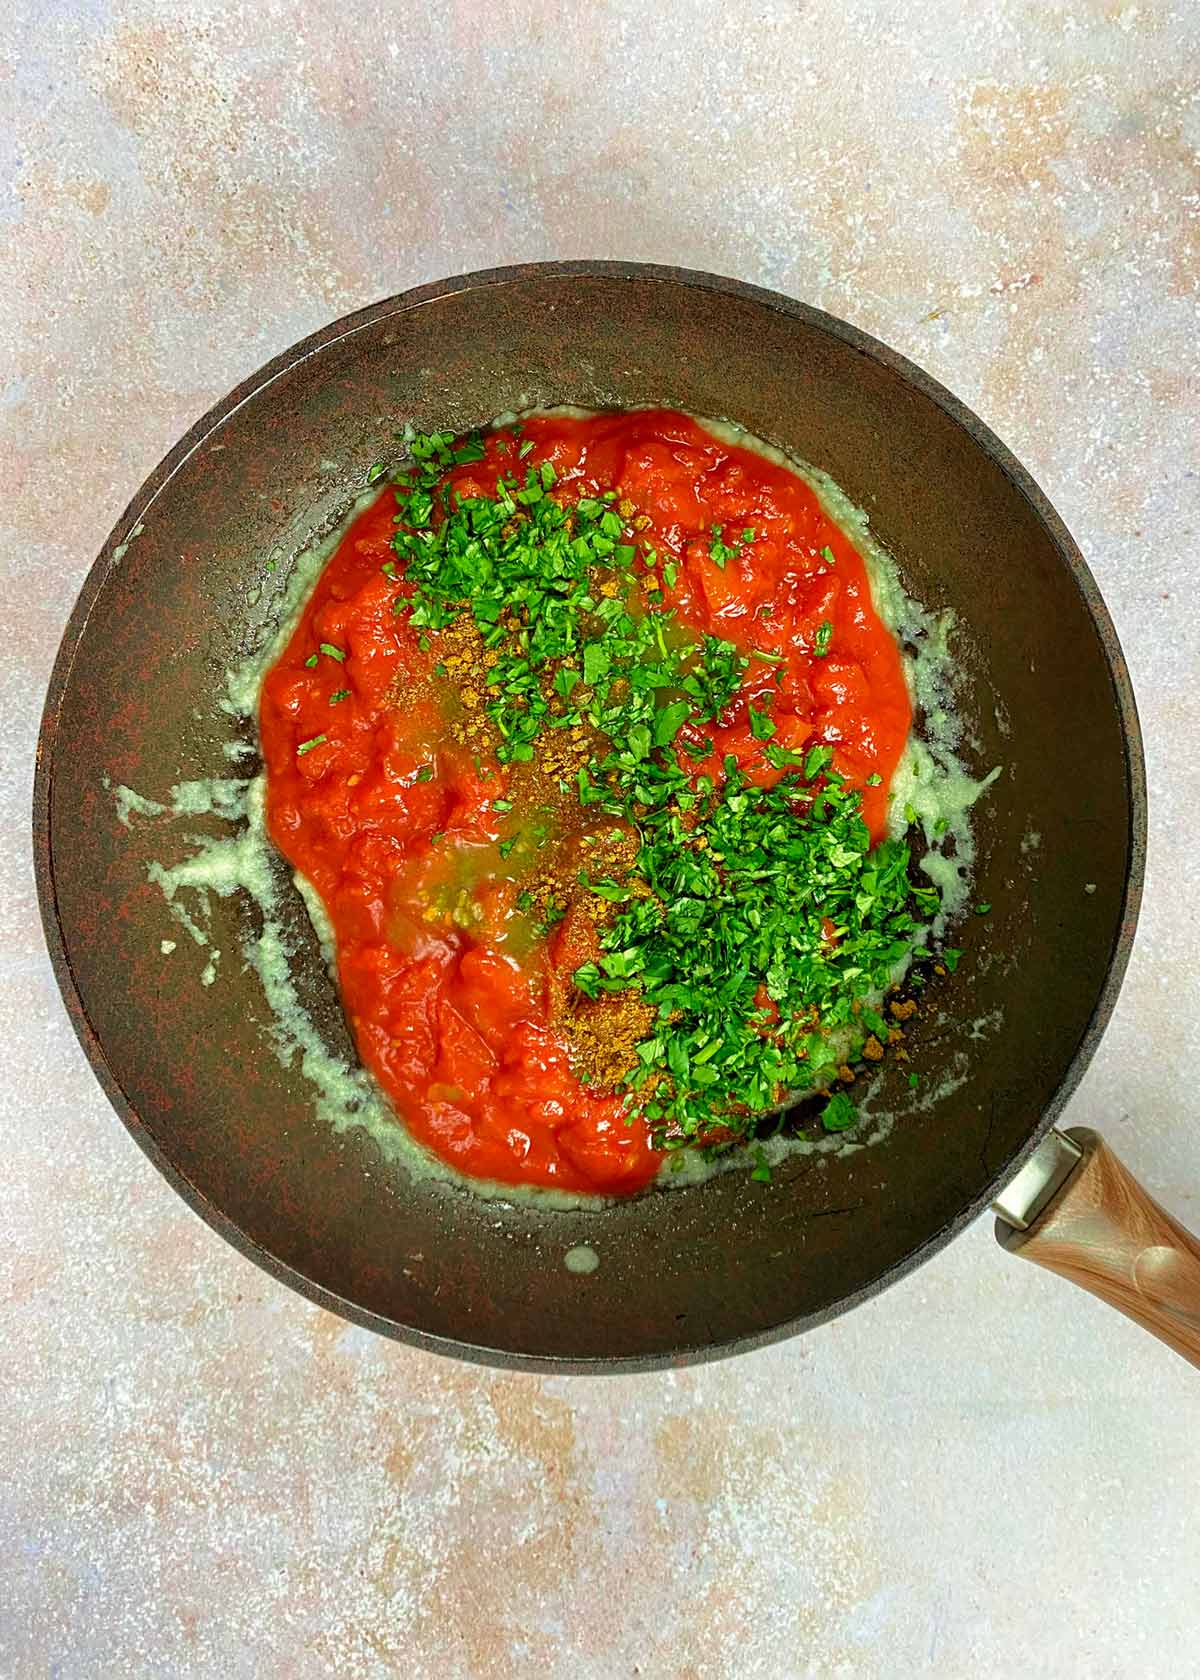 Chopped tomatoes, spice blend and chopped coriander added to the onion paste.